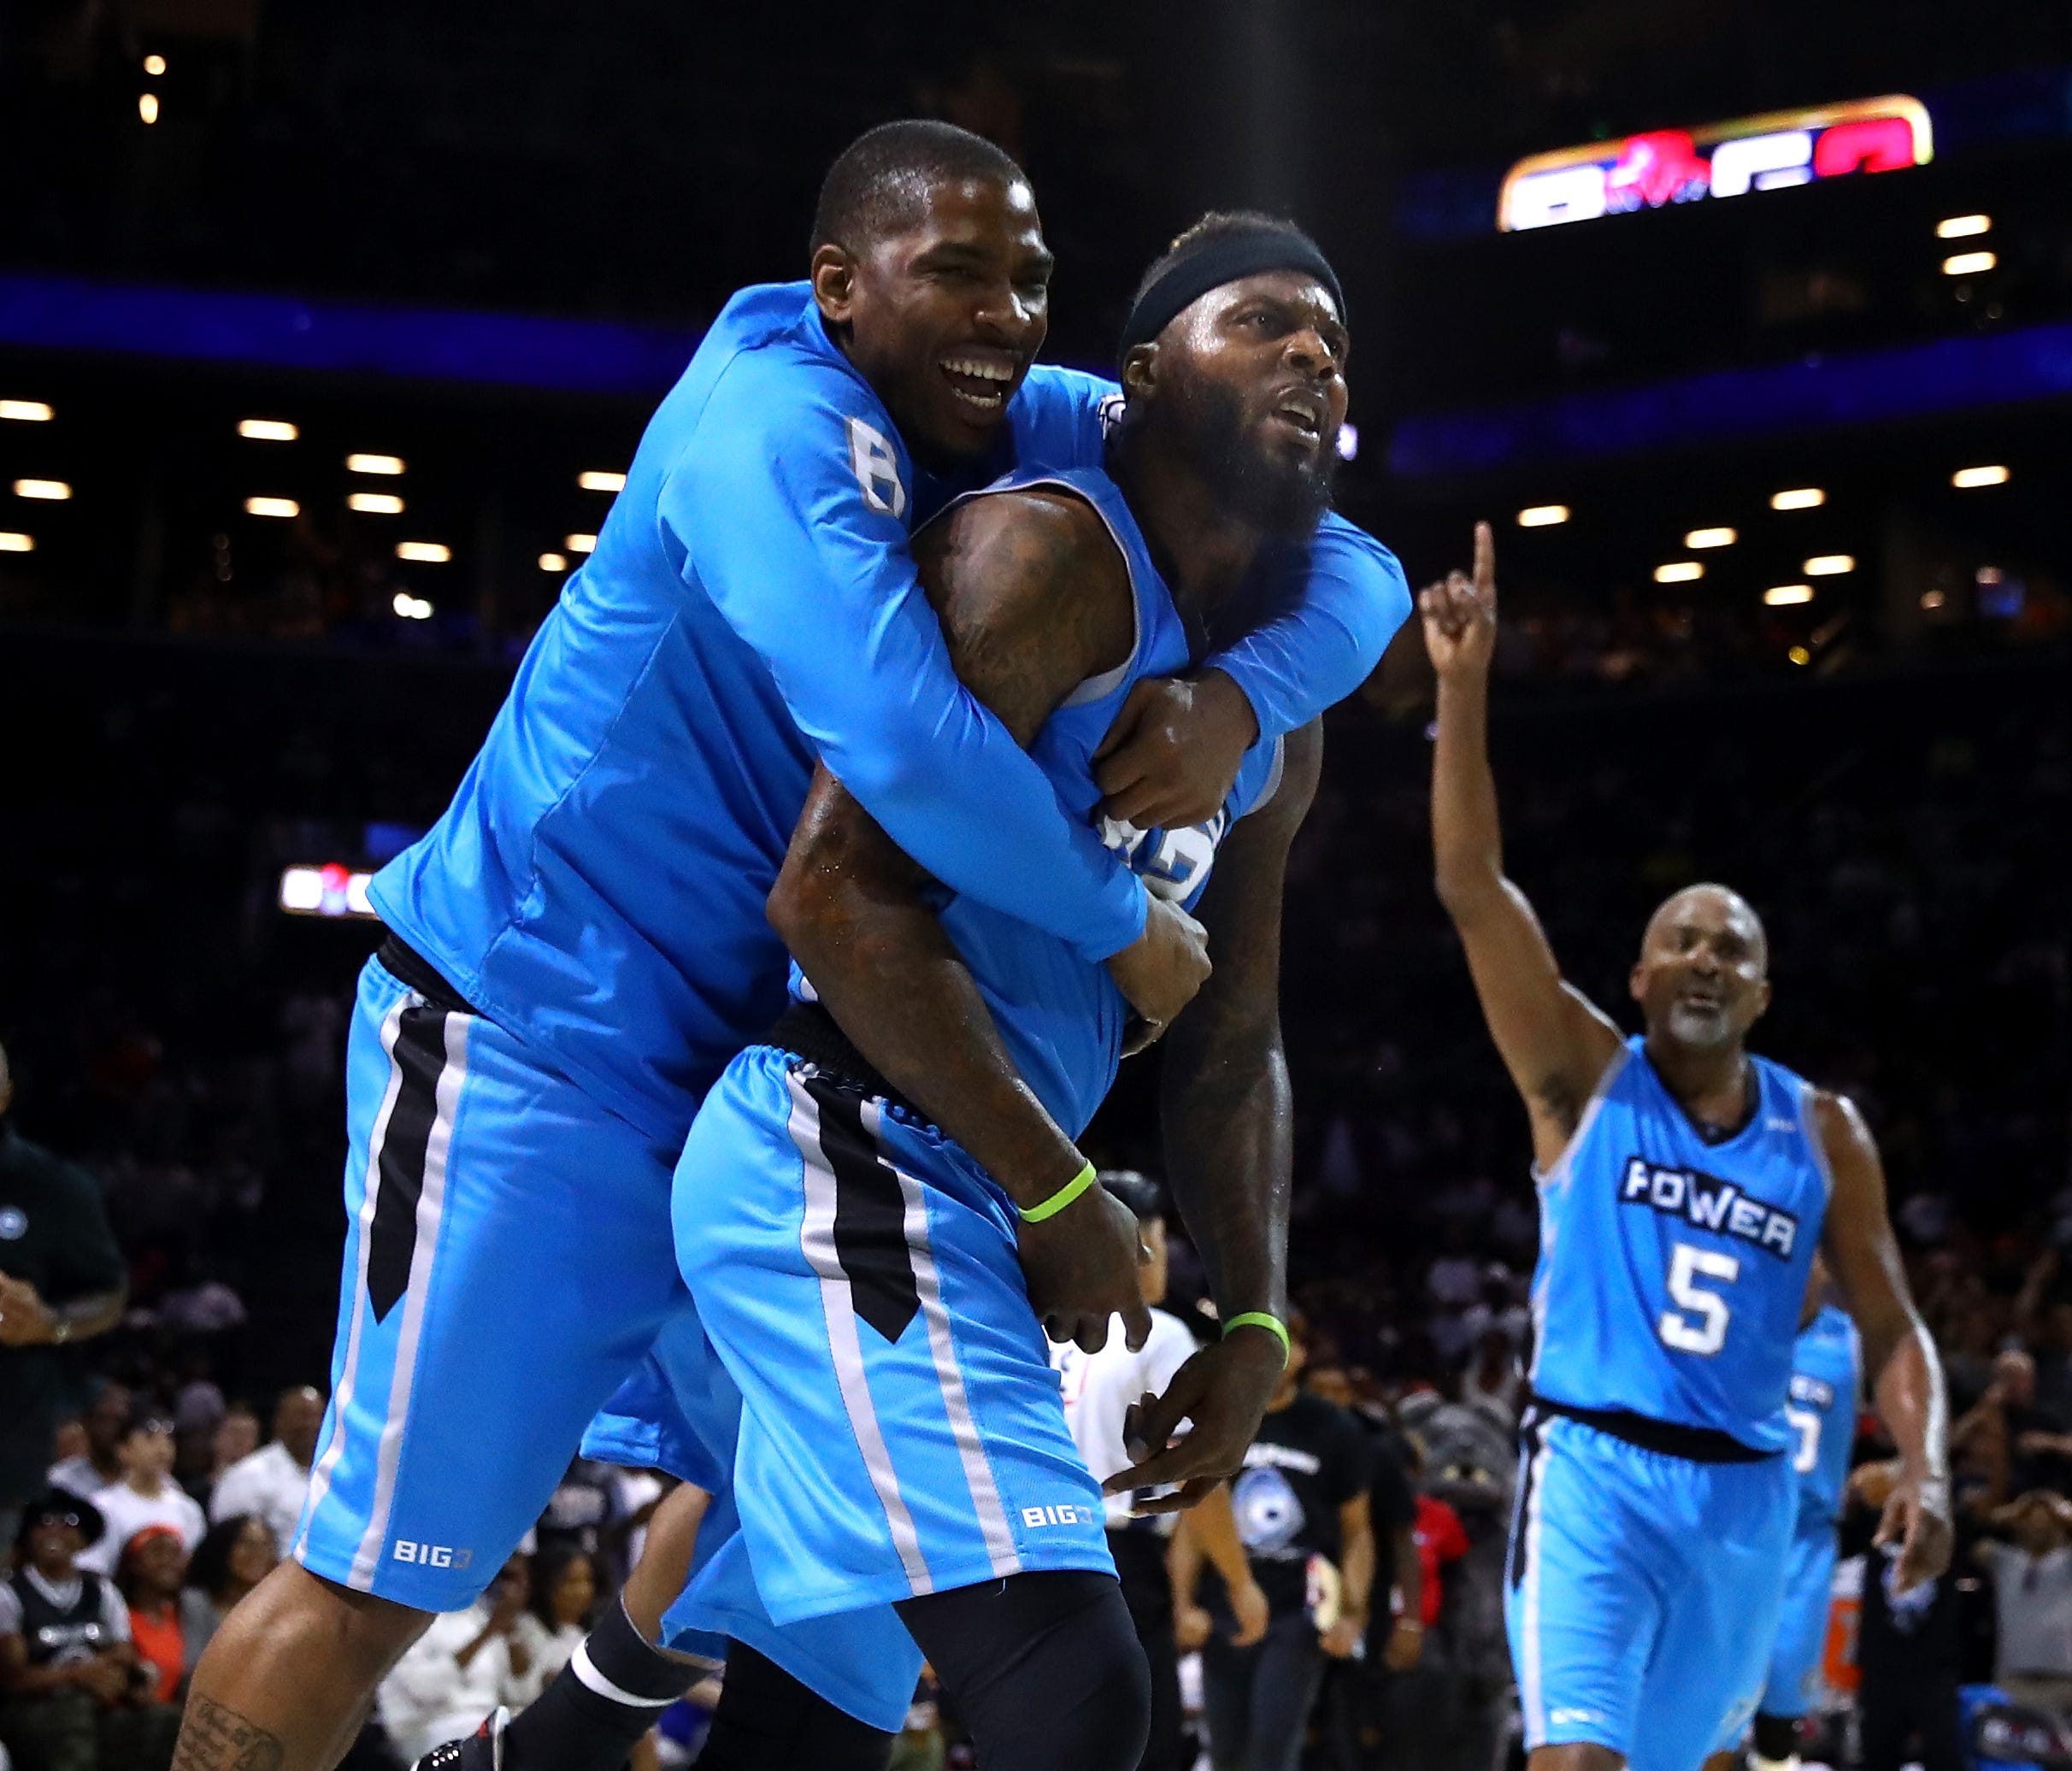 Deshawn Stevenson of Power celebrates with teammates after defeating Tri-State during week one of the BIG3 basketball league at Barclays Center.